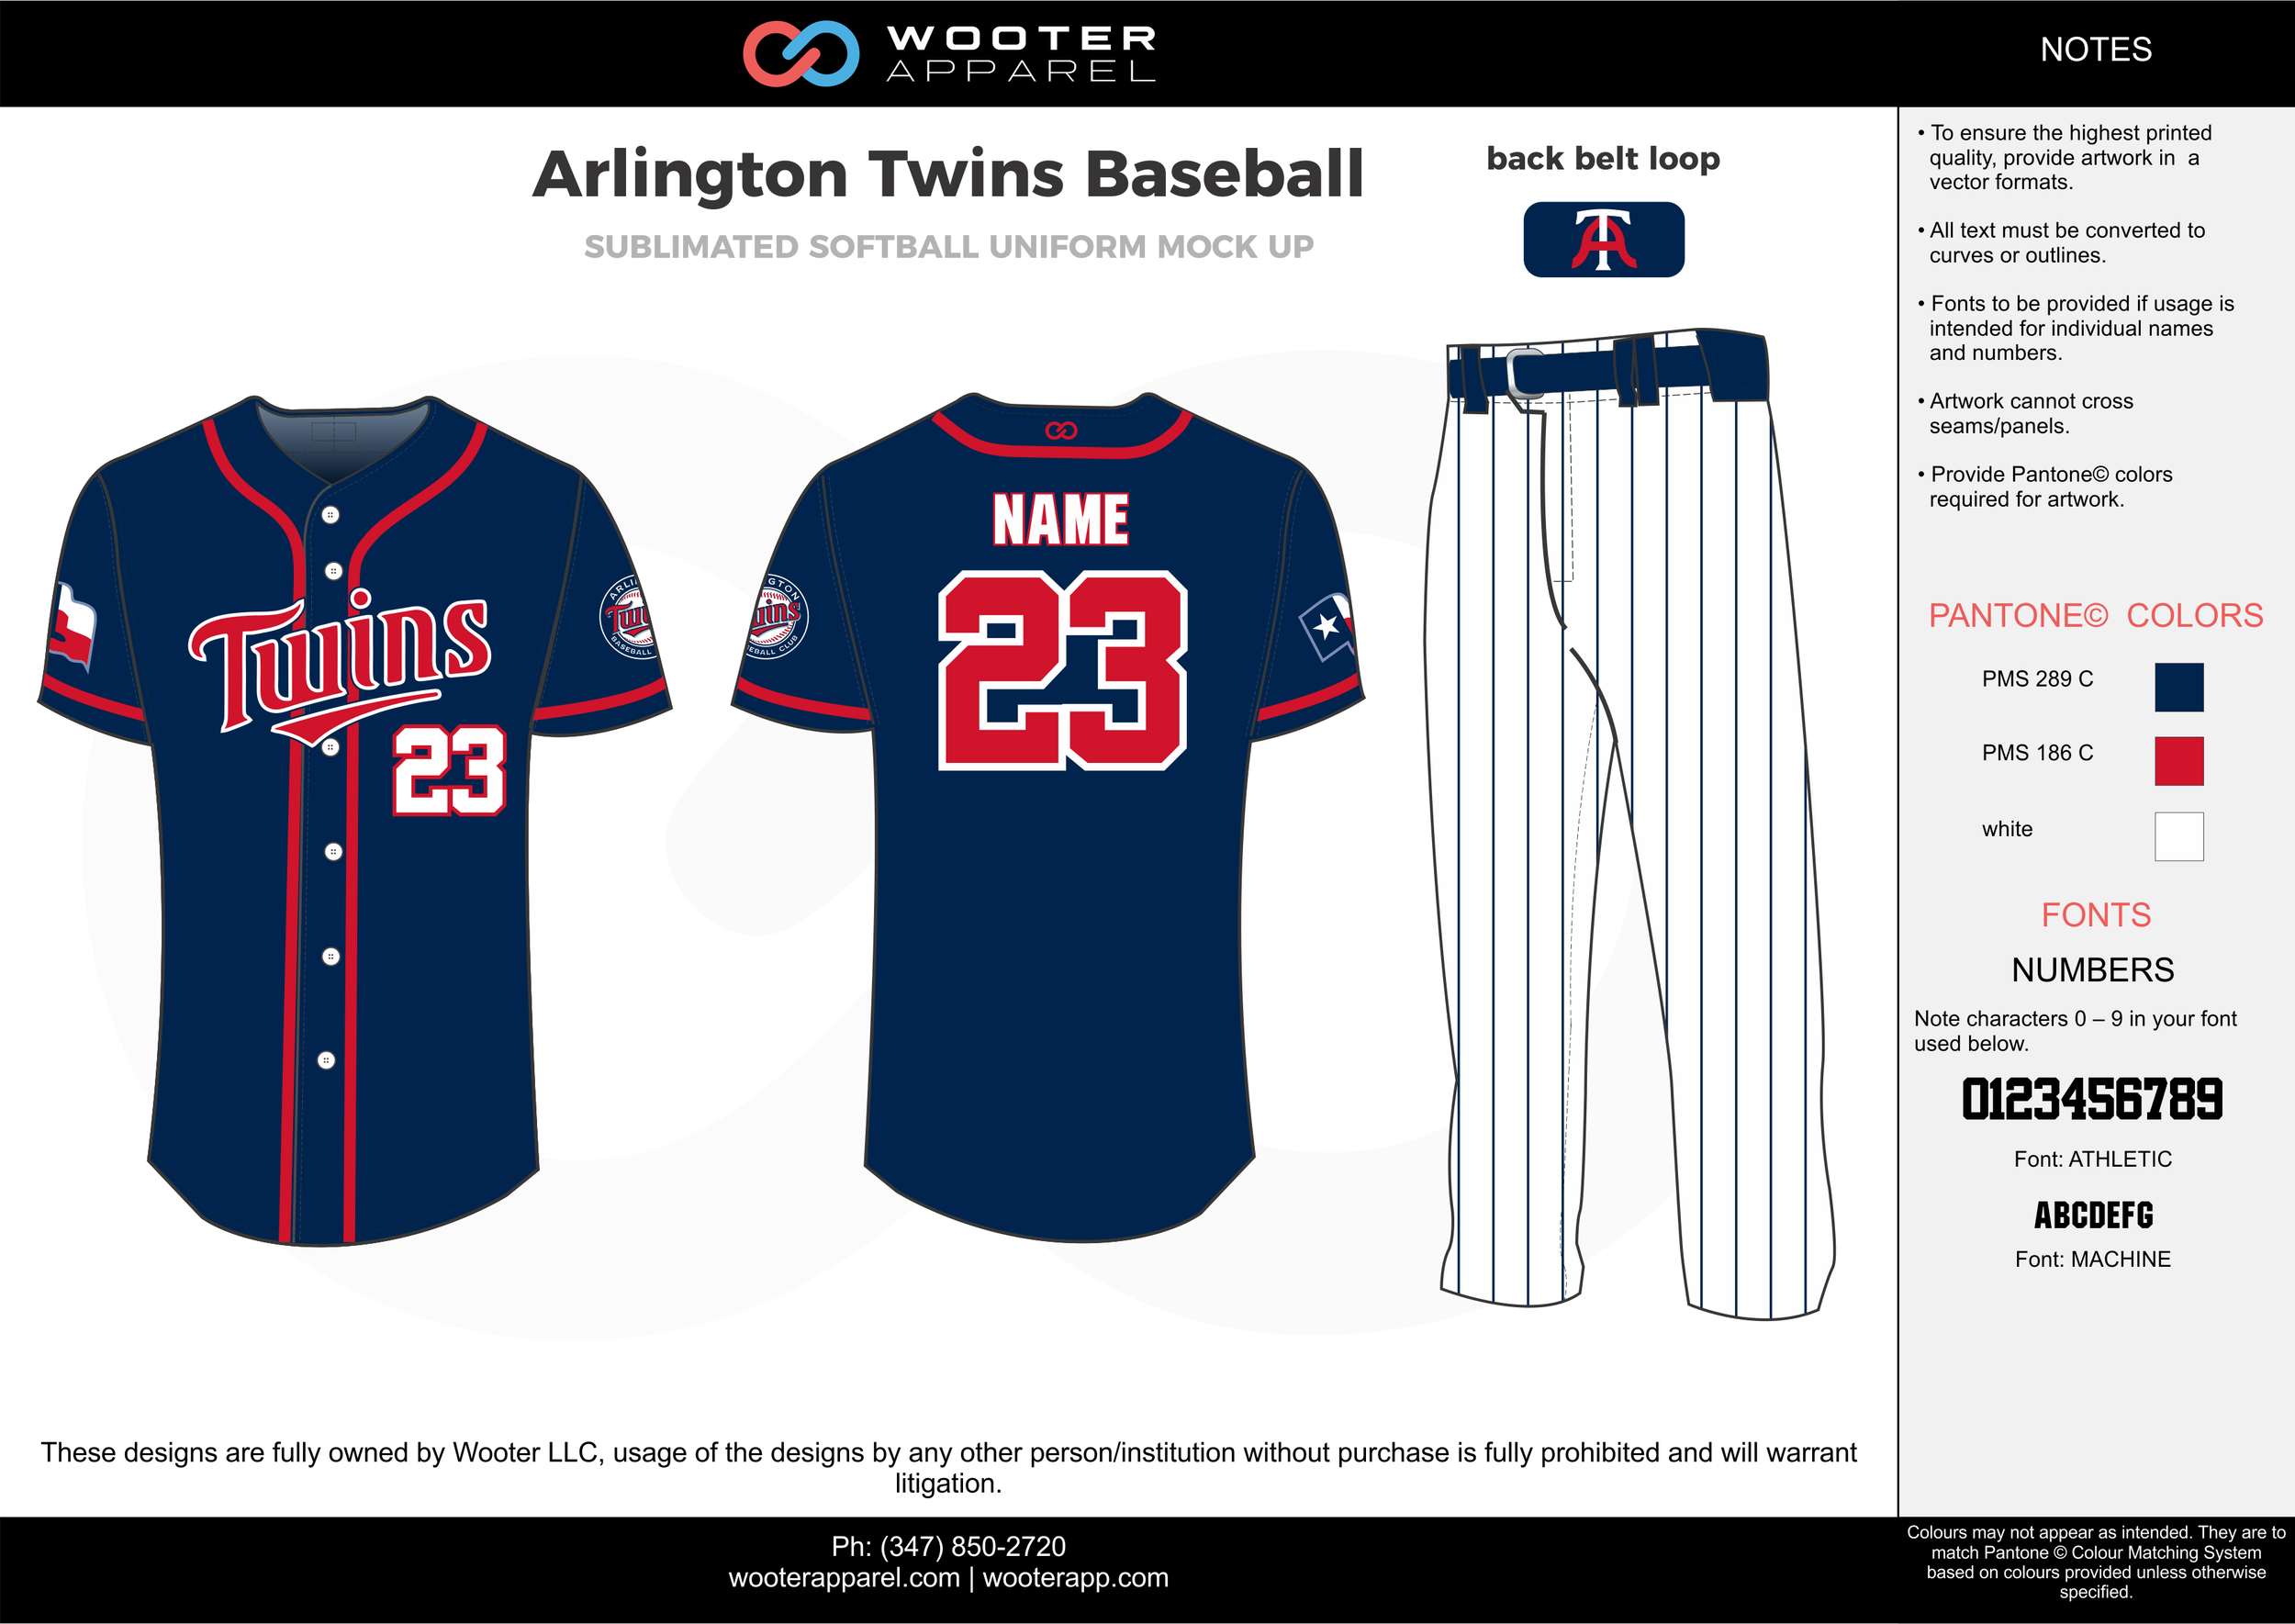 red white and blue youth baseball jersey